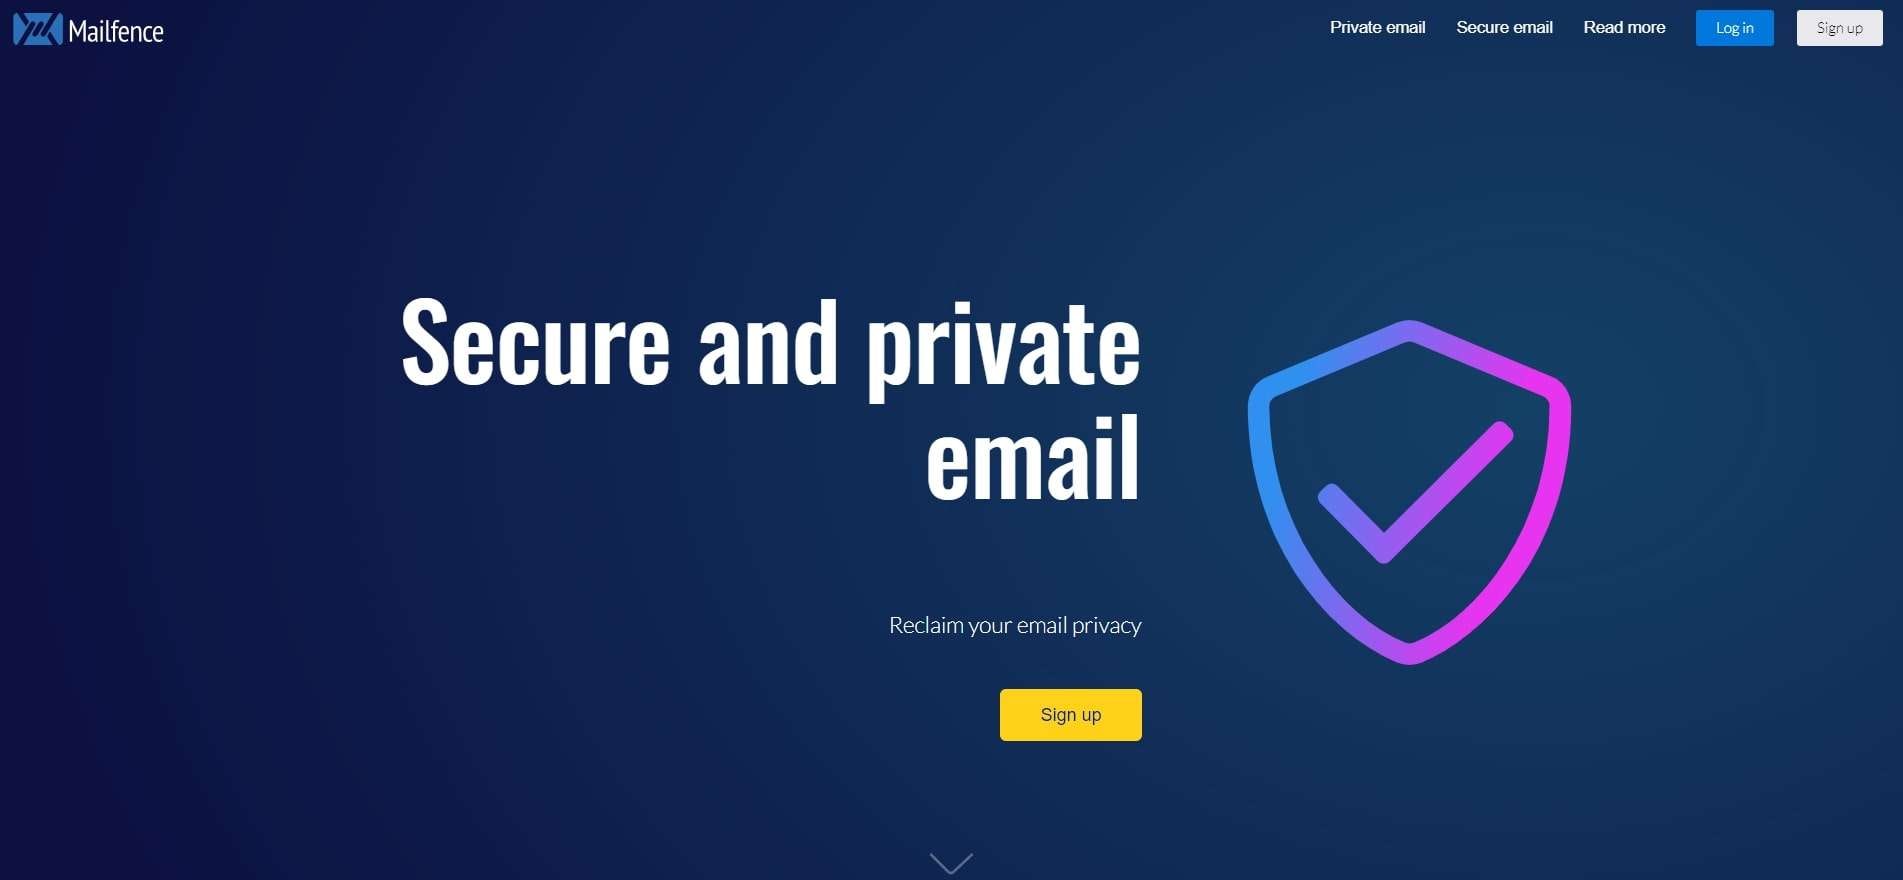 mailfence site web email anonyme 